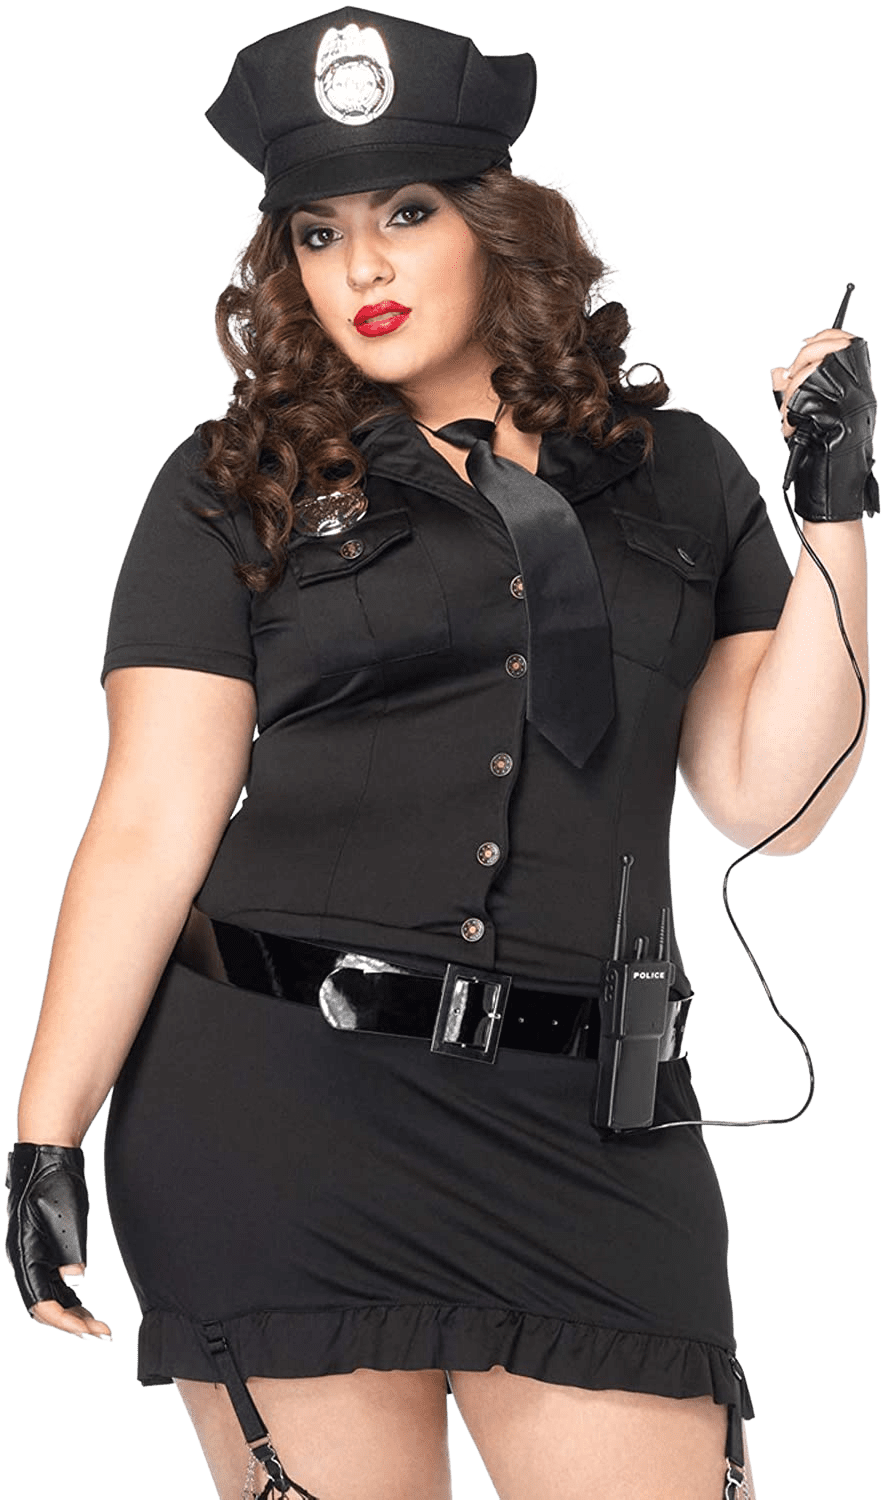 Leg Avenue Women's 6 Piece Dirty Cop Costume | Decor Gifts and More